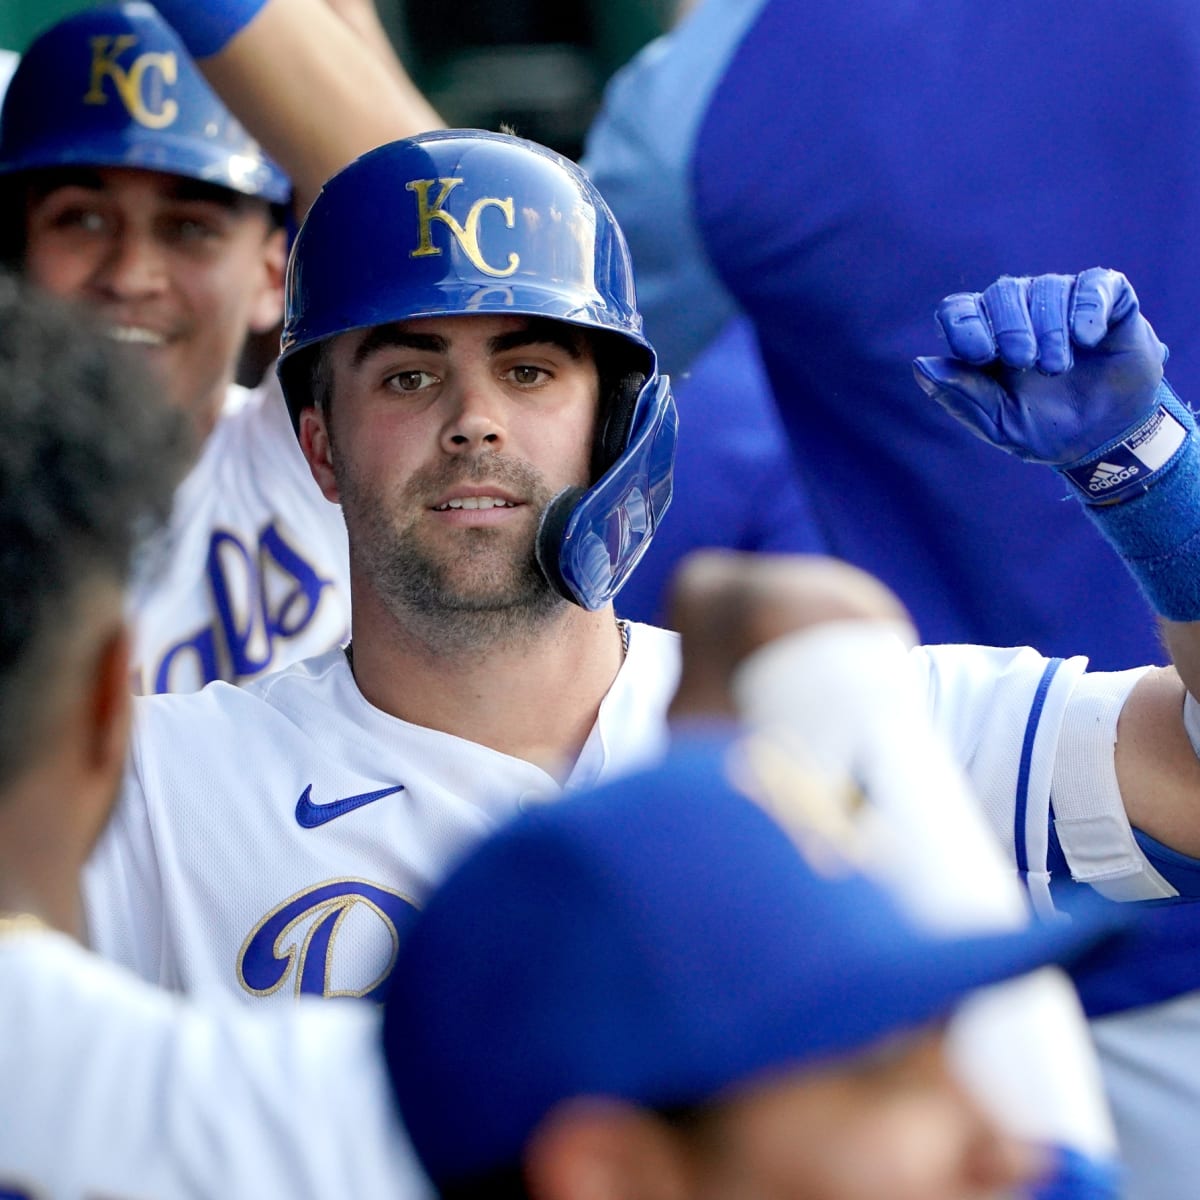 Kansas City Royals: No one will ever be like the 2014-2015 Royals